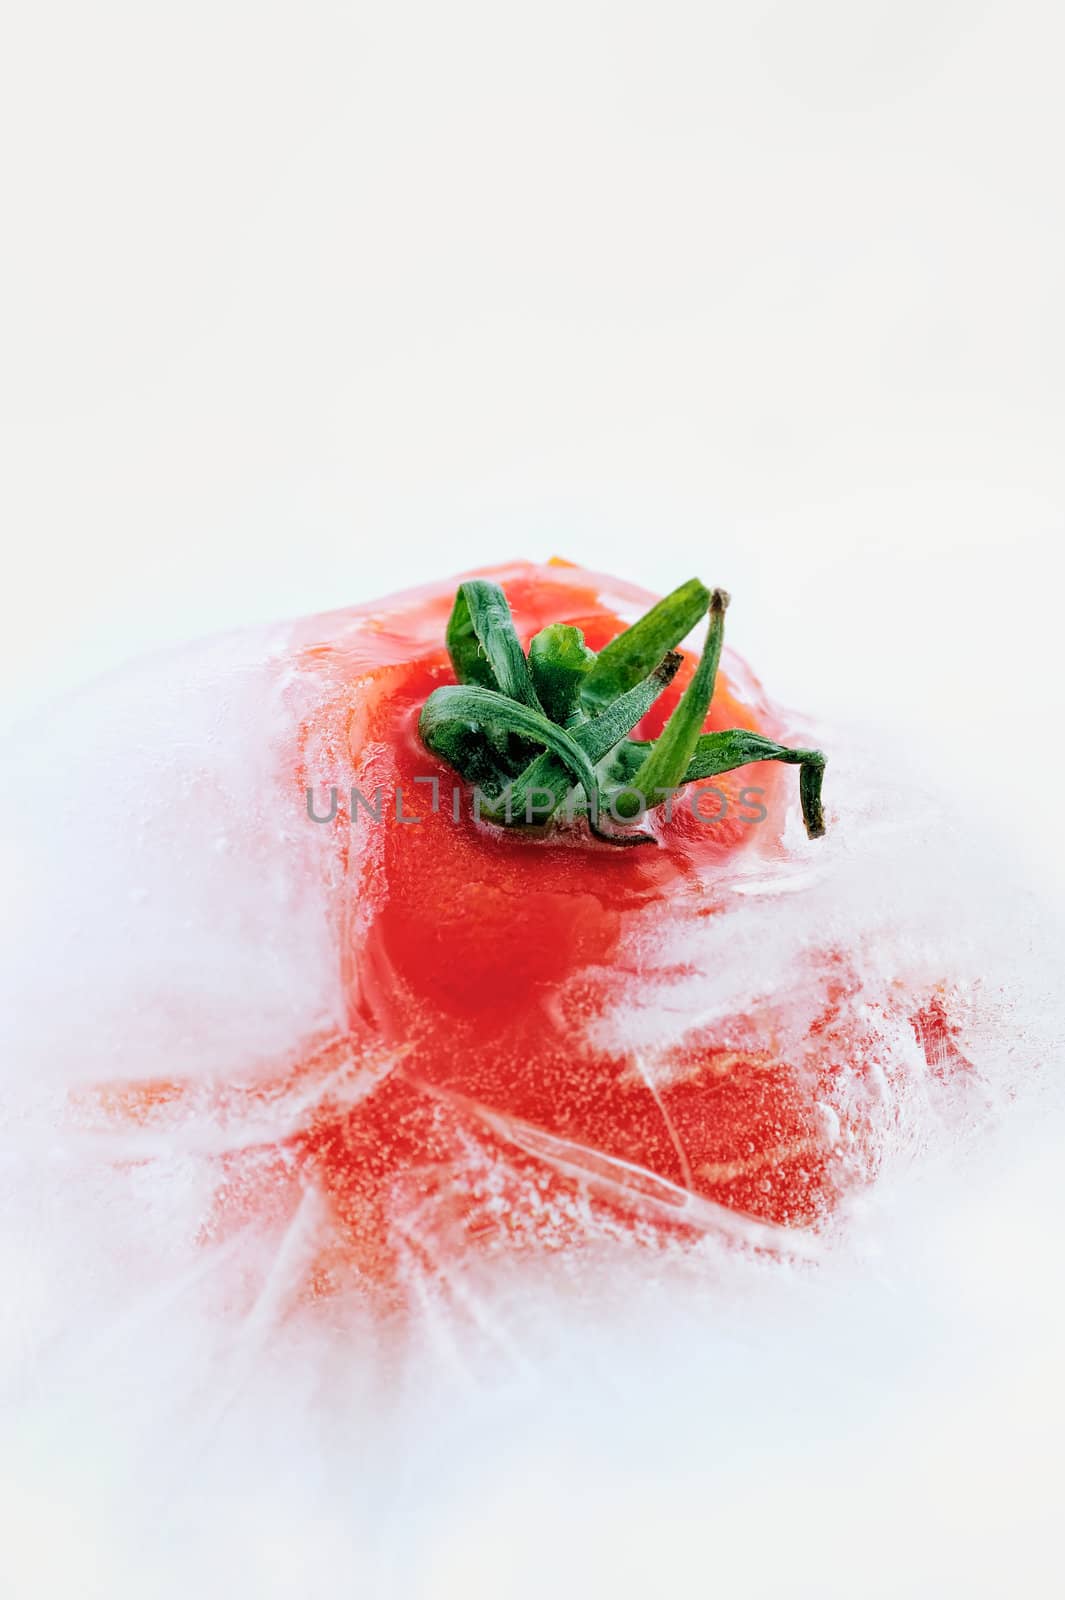 Tomato frozen in ice cube, isolated on white background